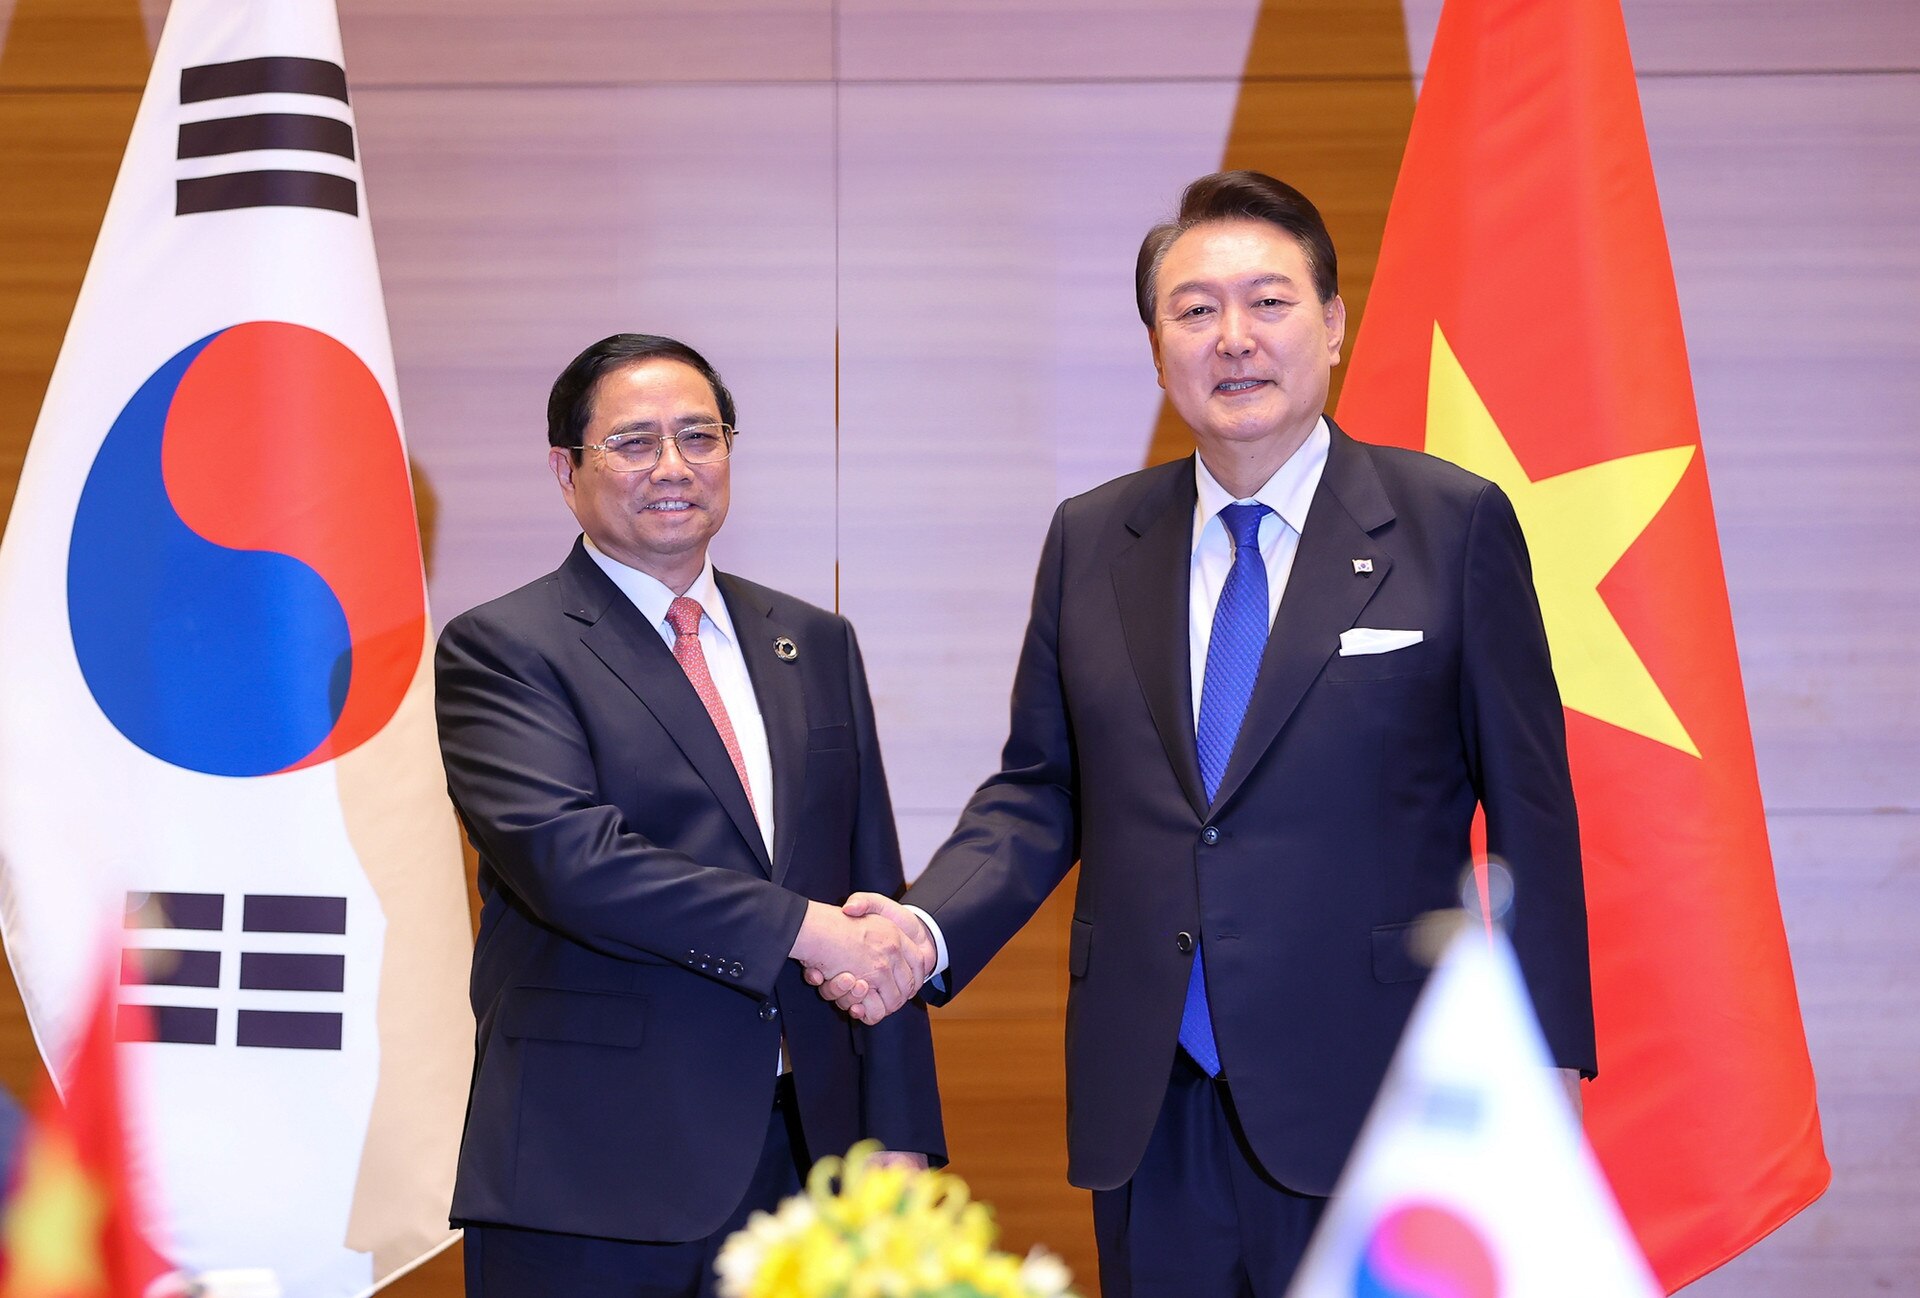 Prime Minister Pham Minh Chinh meets with the President of the Republic of Korea on the occasion of the G7 Open Summit - Photo 1.